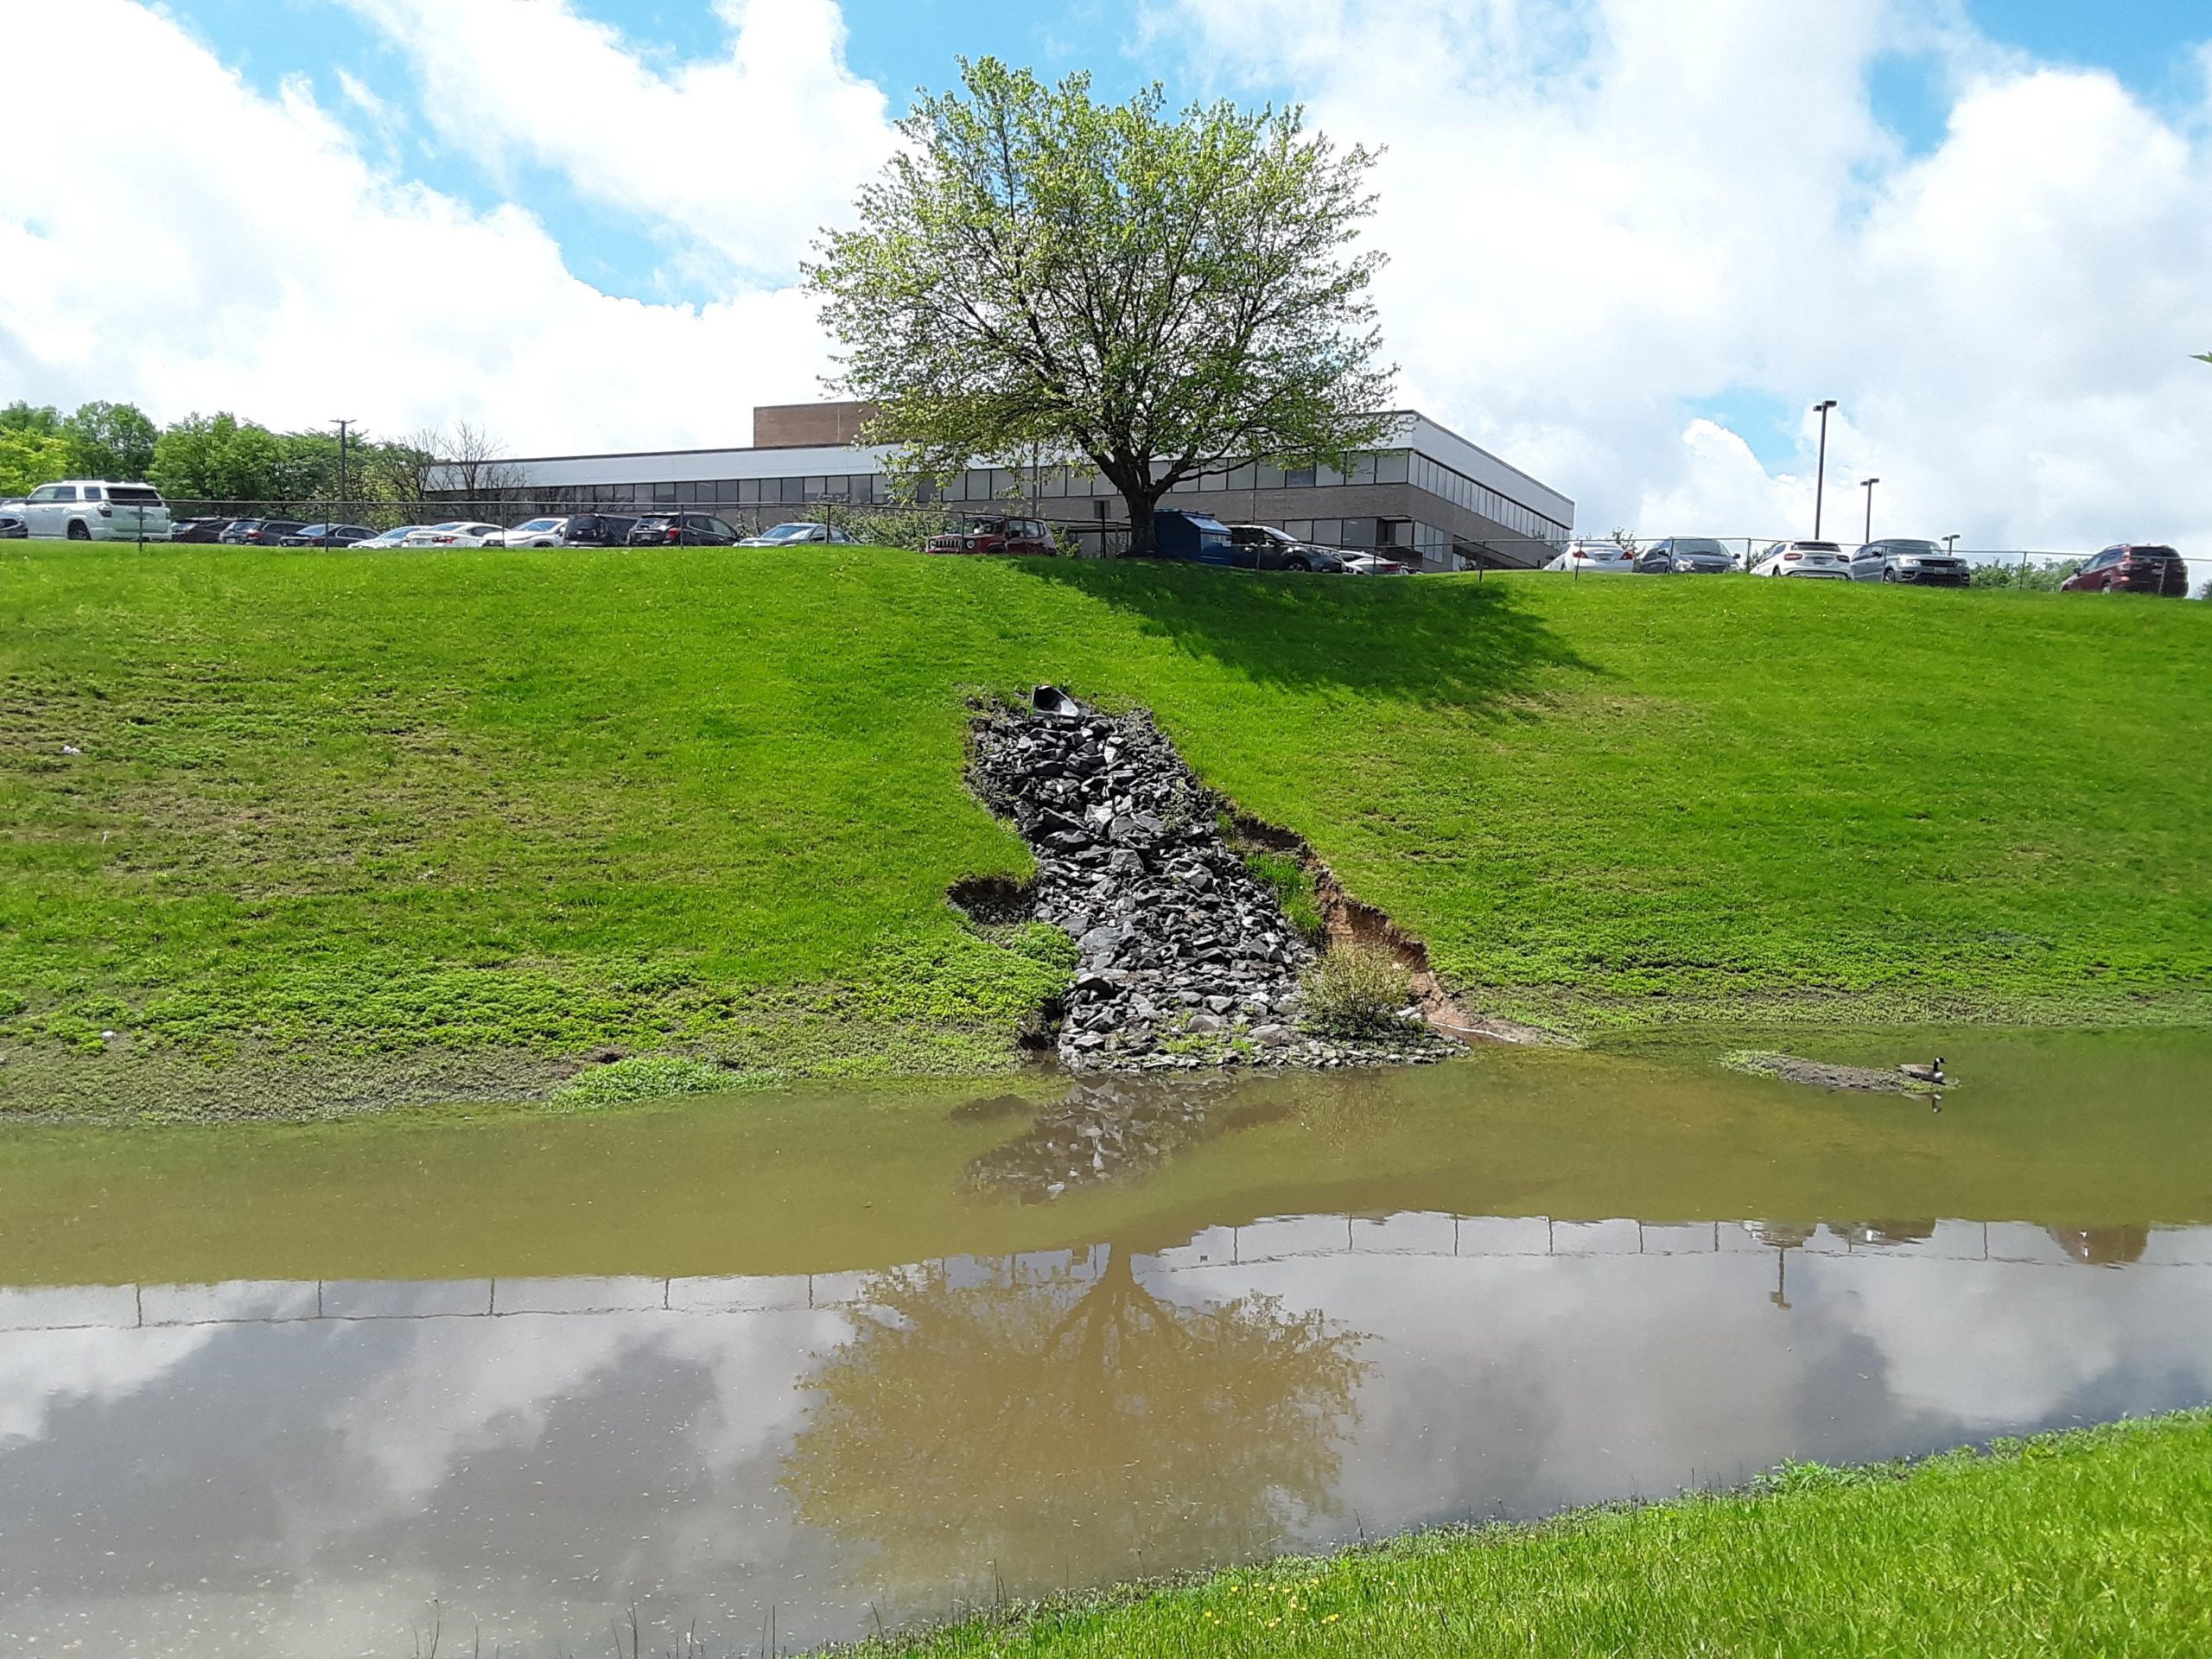 Stormwater detention basin at the foot of grassy hill split by a rock- filled gash below office building and parking lot